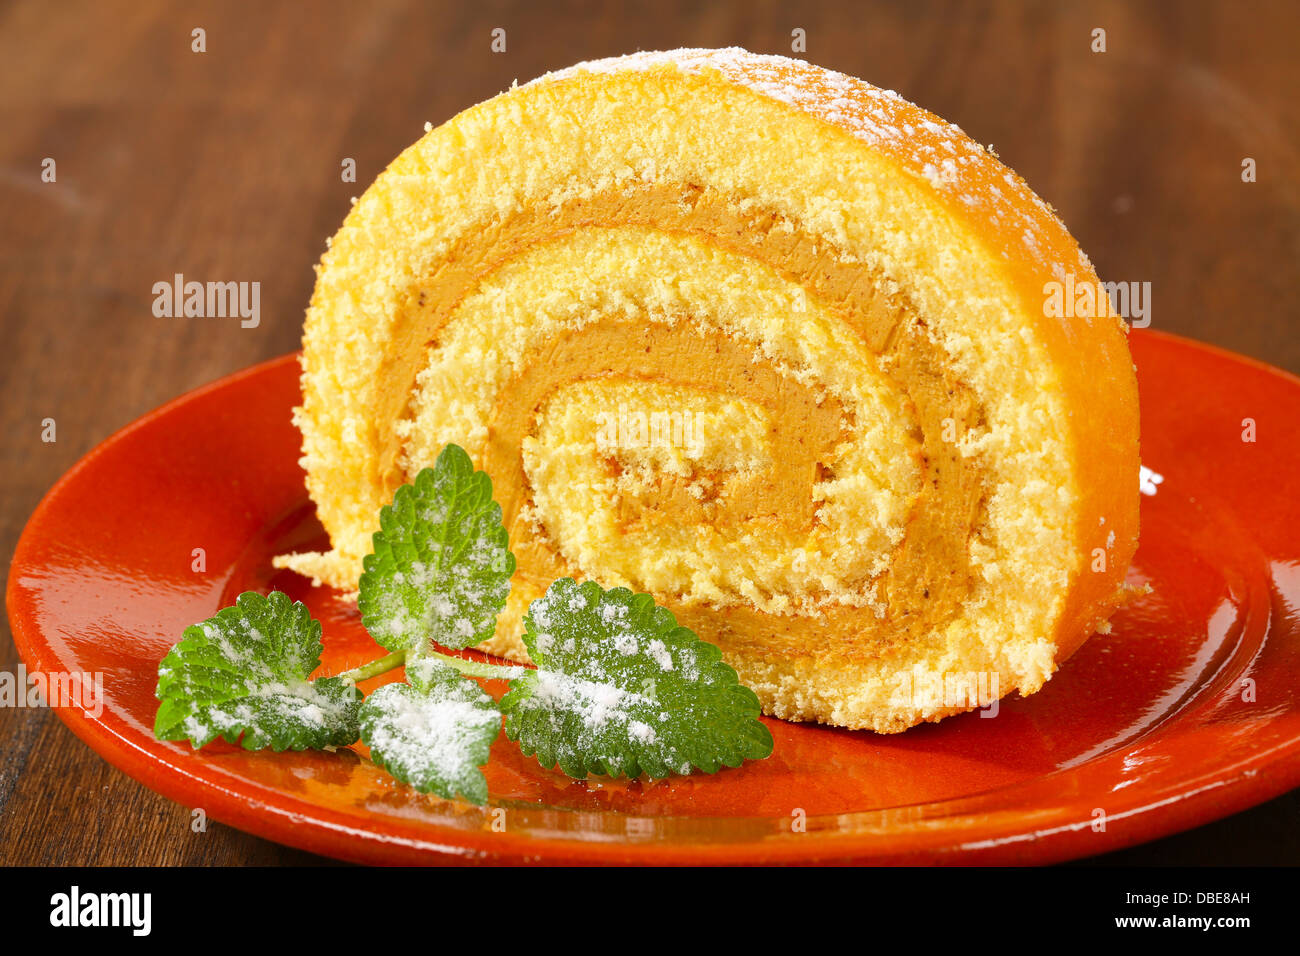 Swiss roll with peanut butter cream filling Stock Photo